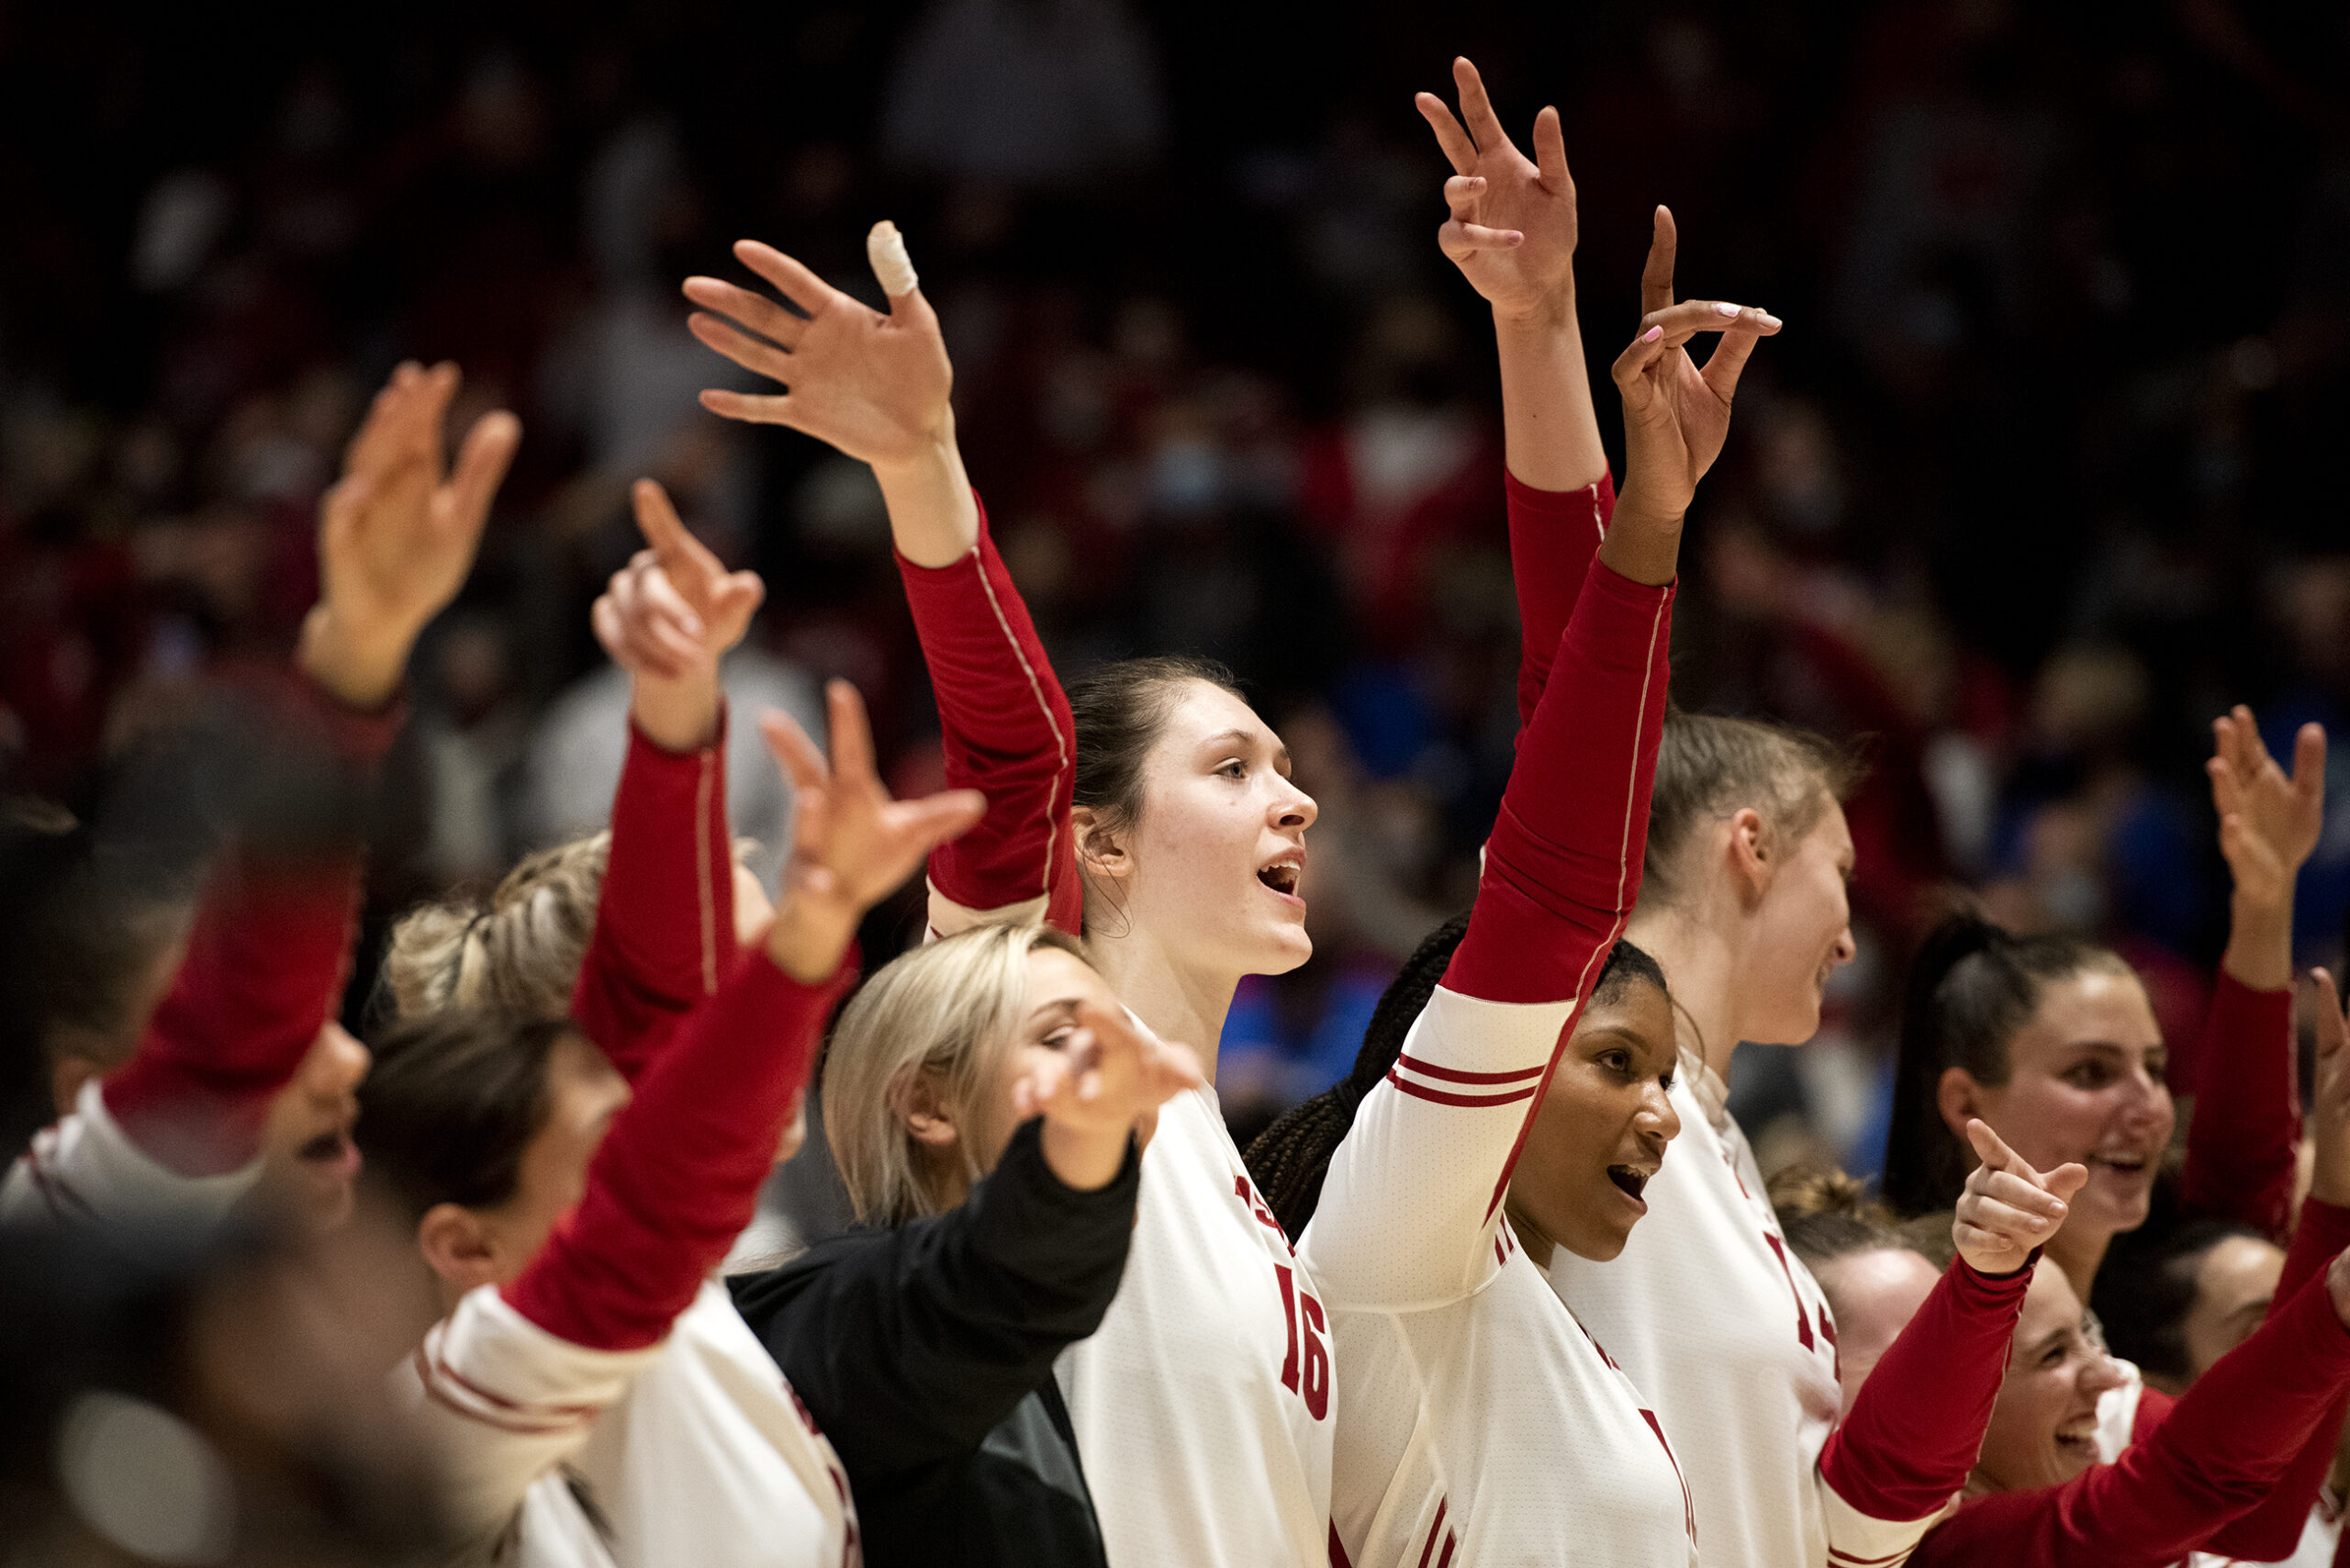 The Wisconsin team raises their arms as they line up on the court after the match.